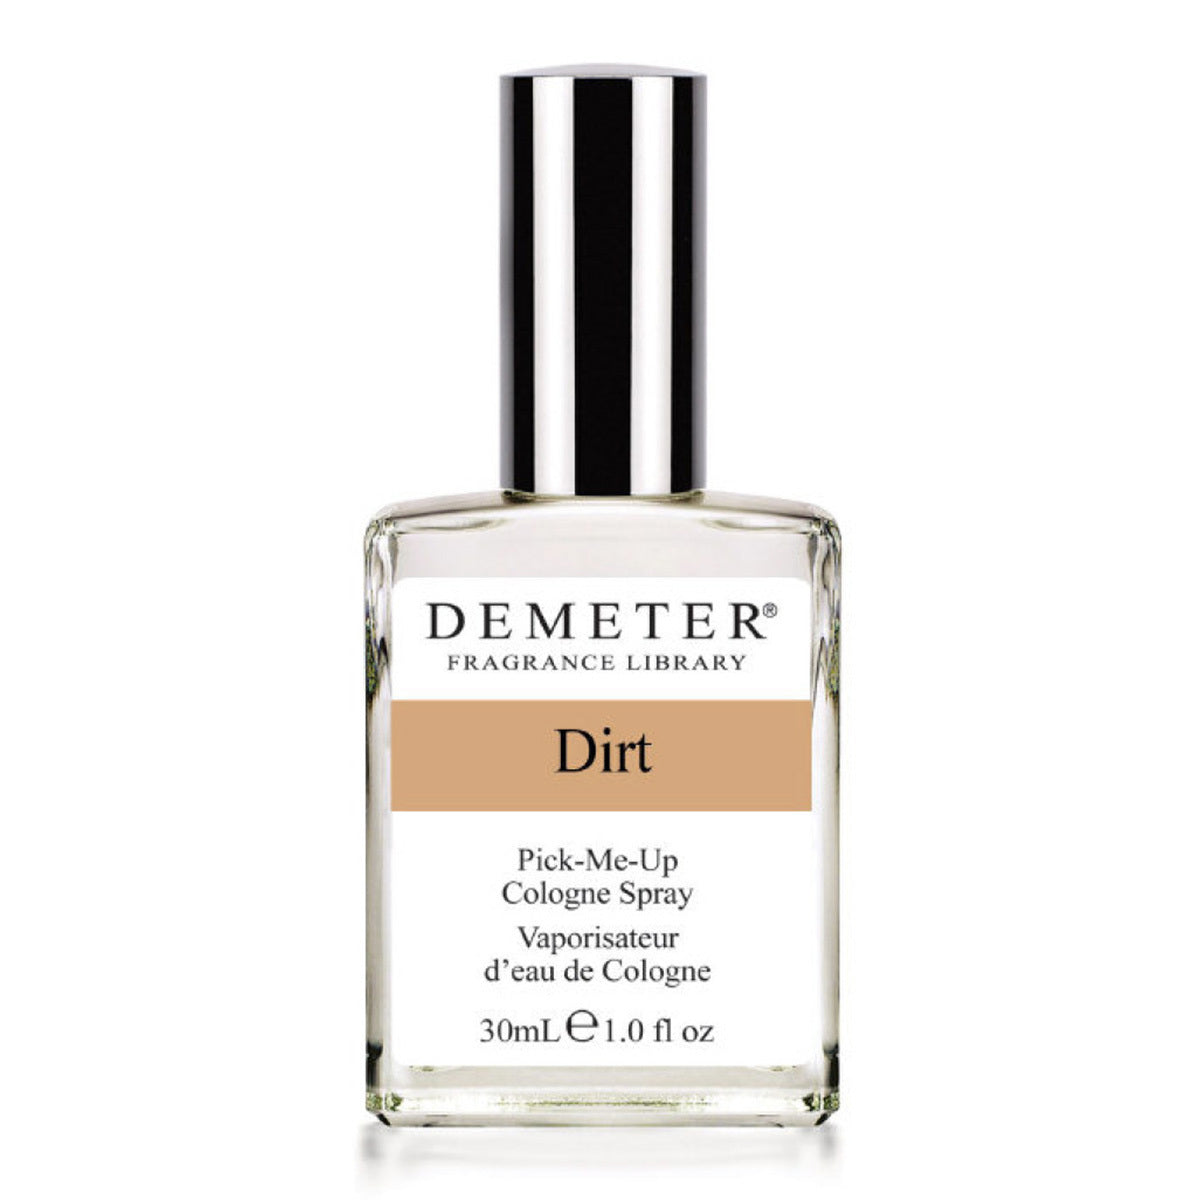 Primary image of Dirt Cologne Spray